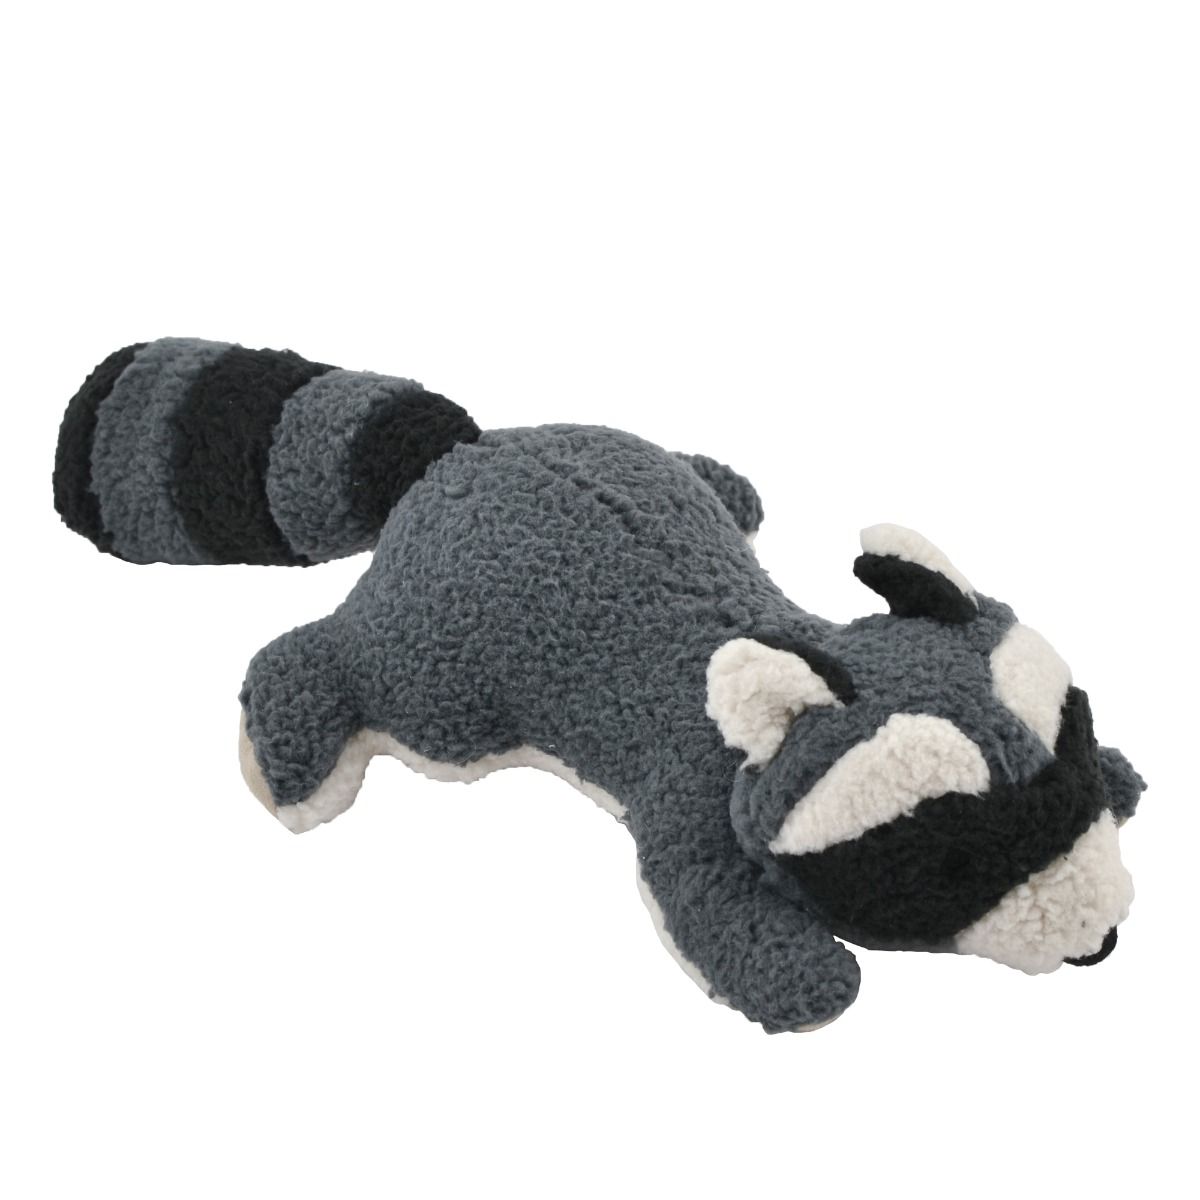 88216748 Squeaker Racoon Dog Plush Toy - 12 In.